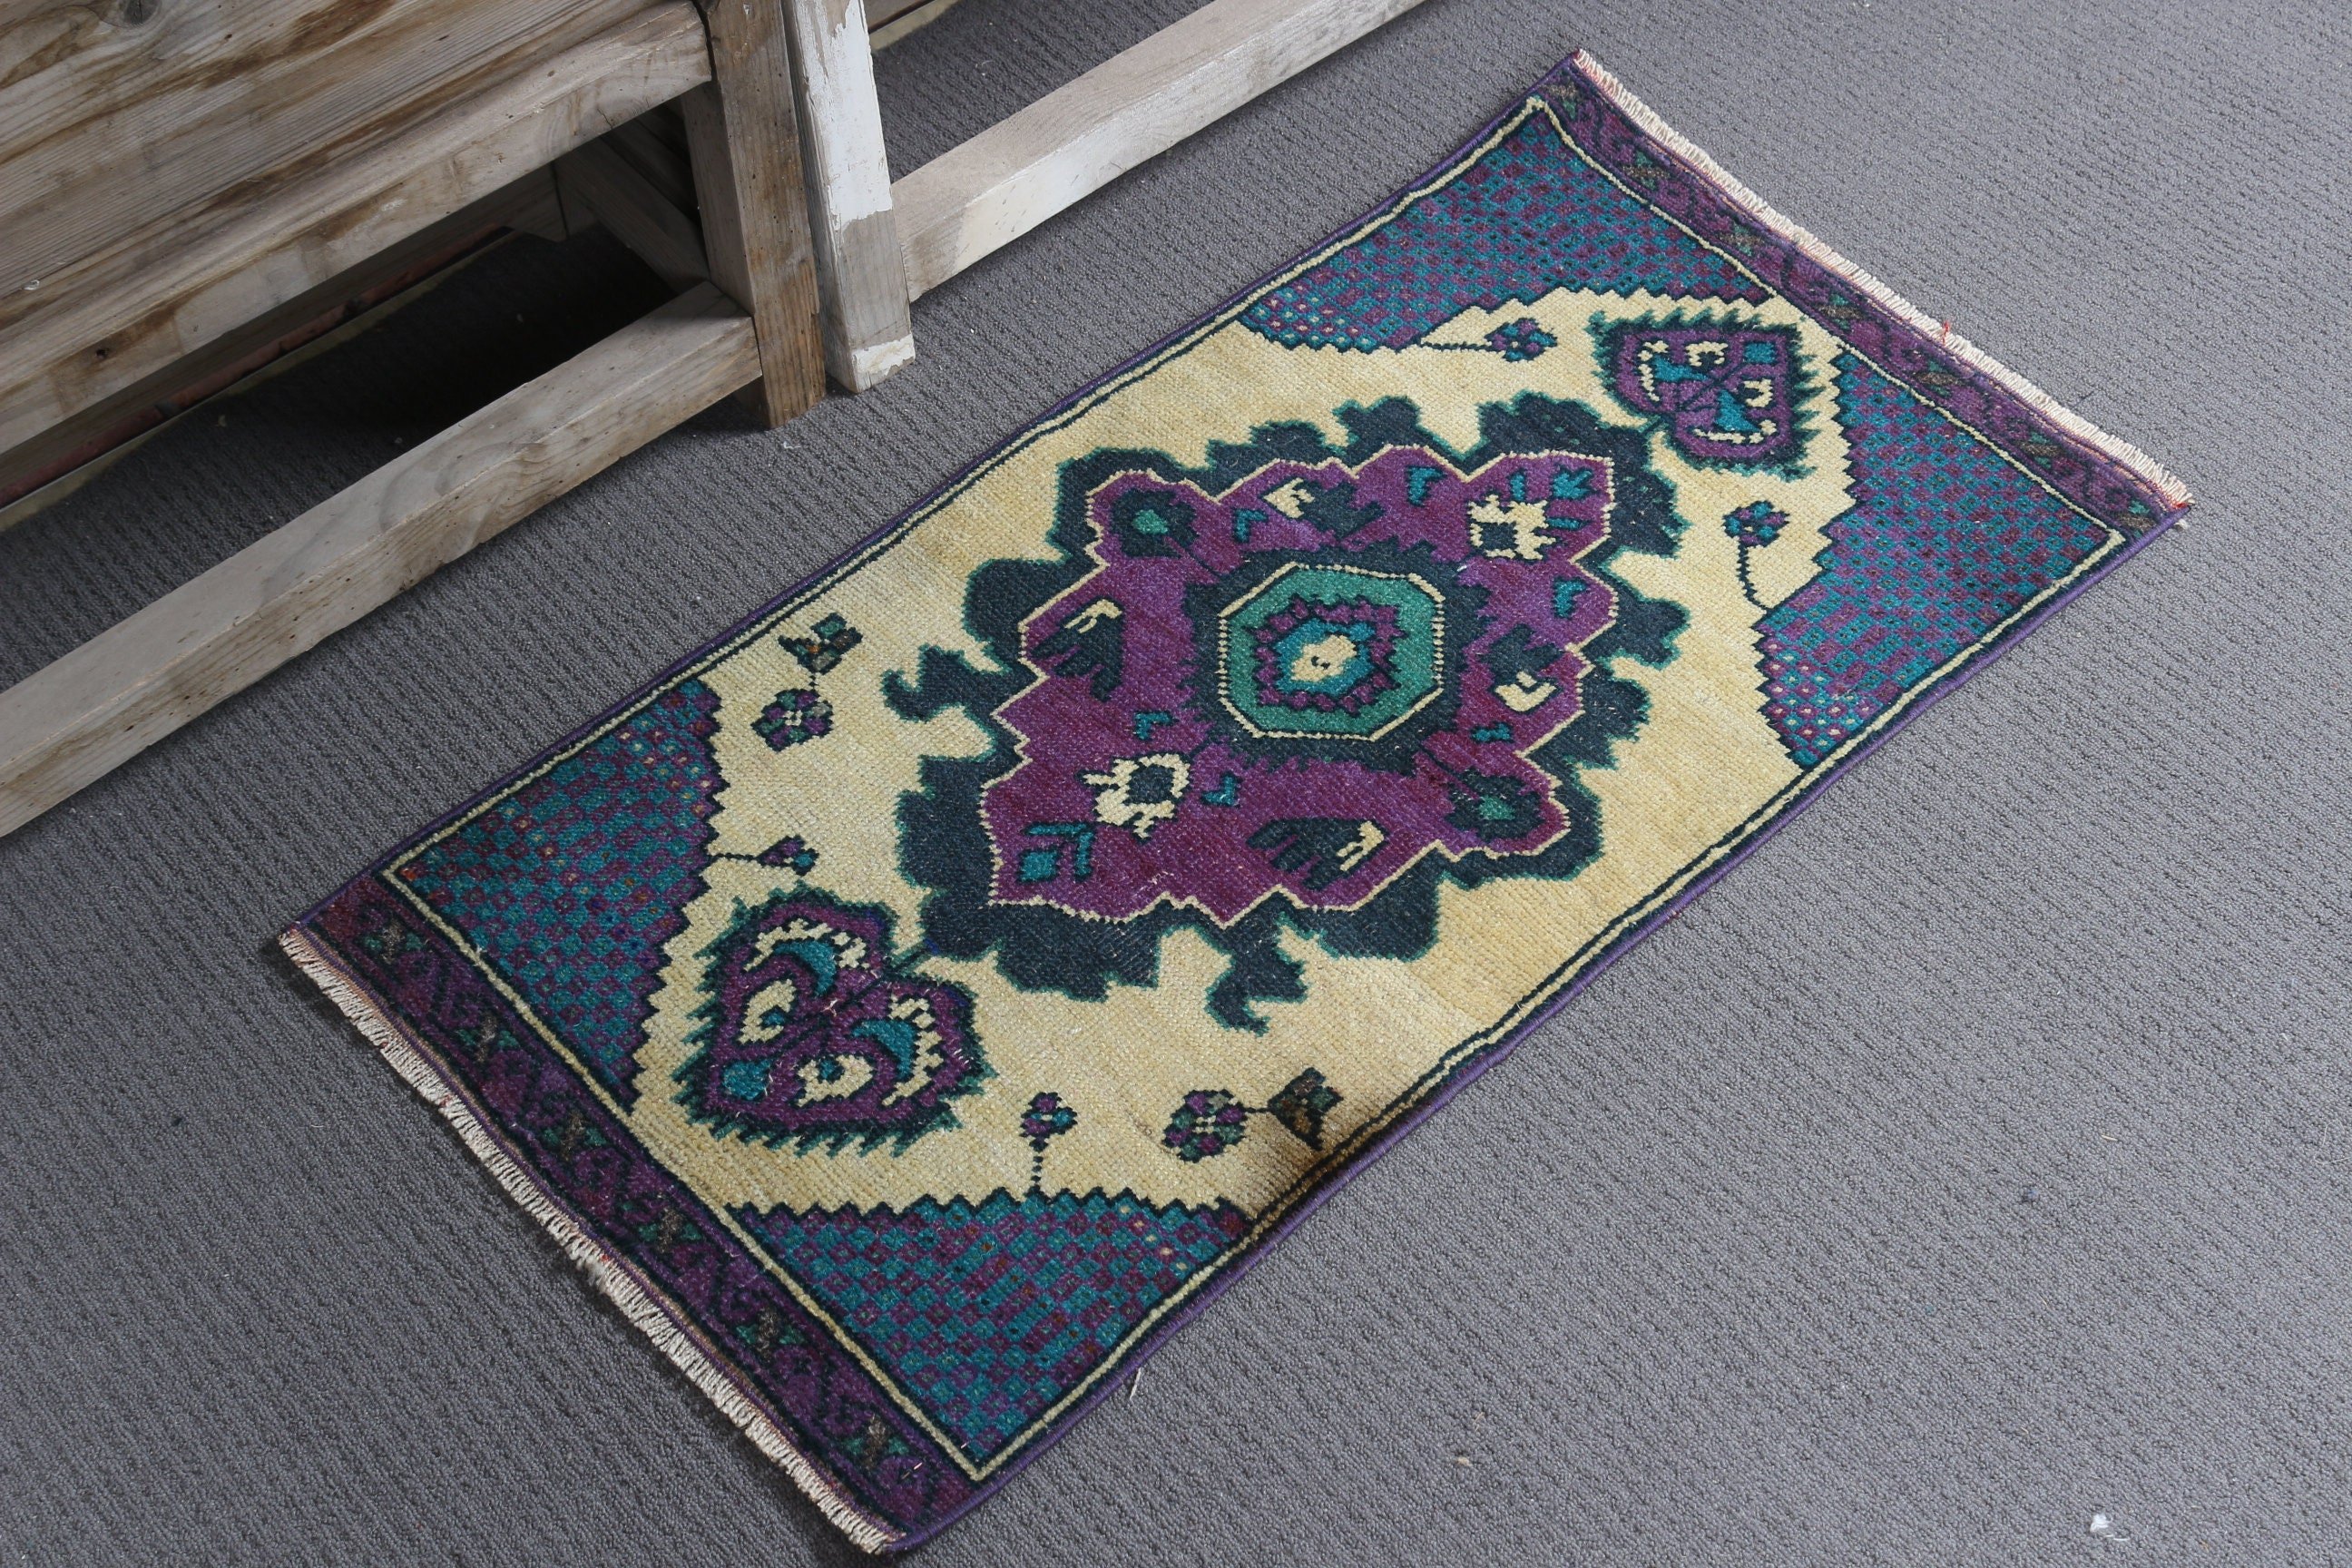 Oriental Rugs, Kitchen Rug, Entry Rug, Vintage Rugs, Purple Bedroom Rugs, Rugs for Bath, Turkish Rug, Home Decor Rug, 1.5x3 ft Small Rug